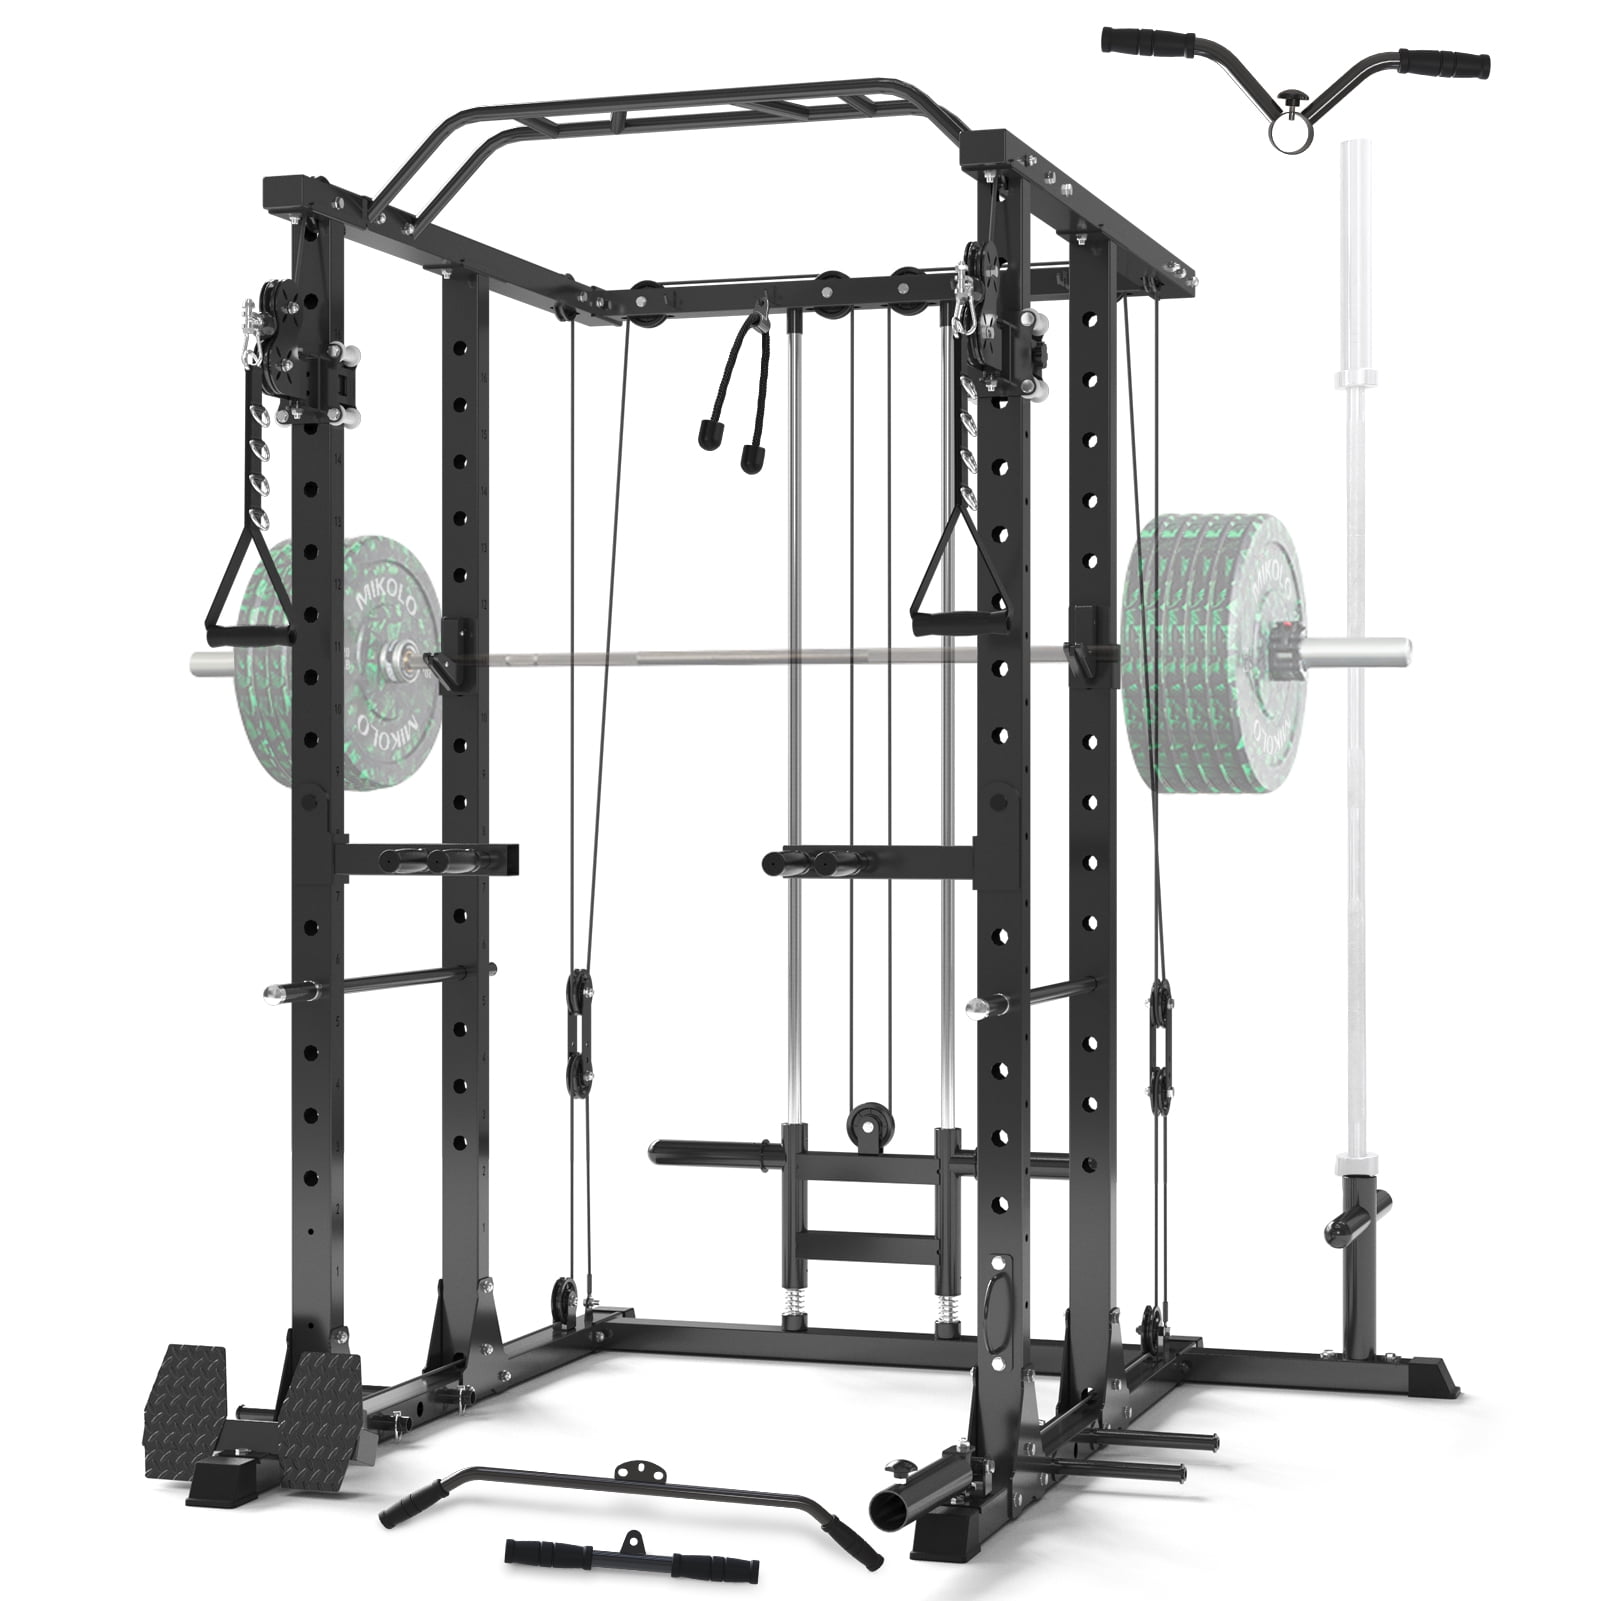 Mikolo Power Rack 1500 lbs Weight Rack with Cable Crossover Machine, Multi-Function Squat Rack with J Hooks,Dip Bars and Landmine for Home Gym (Black) - Walmart.com